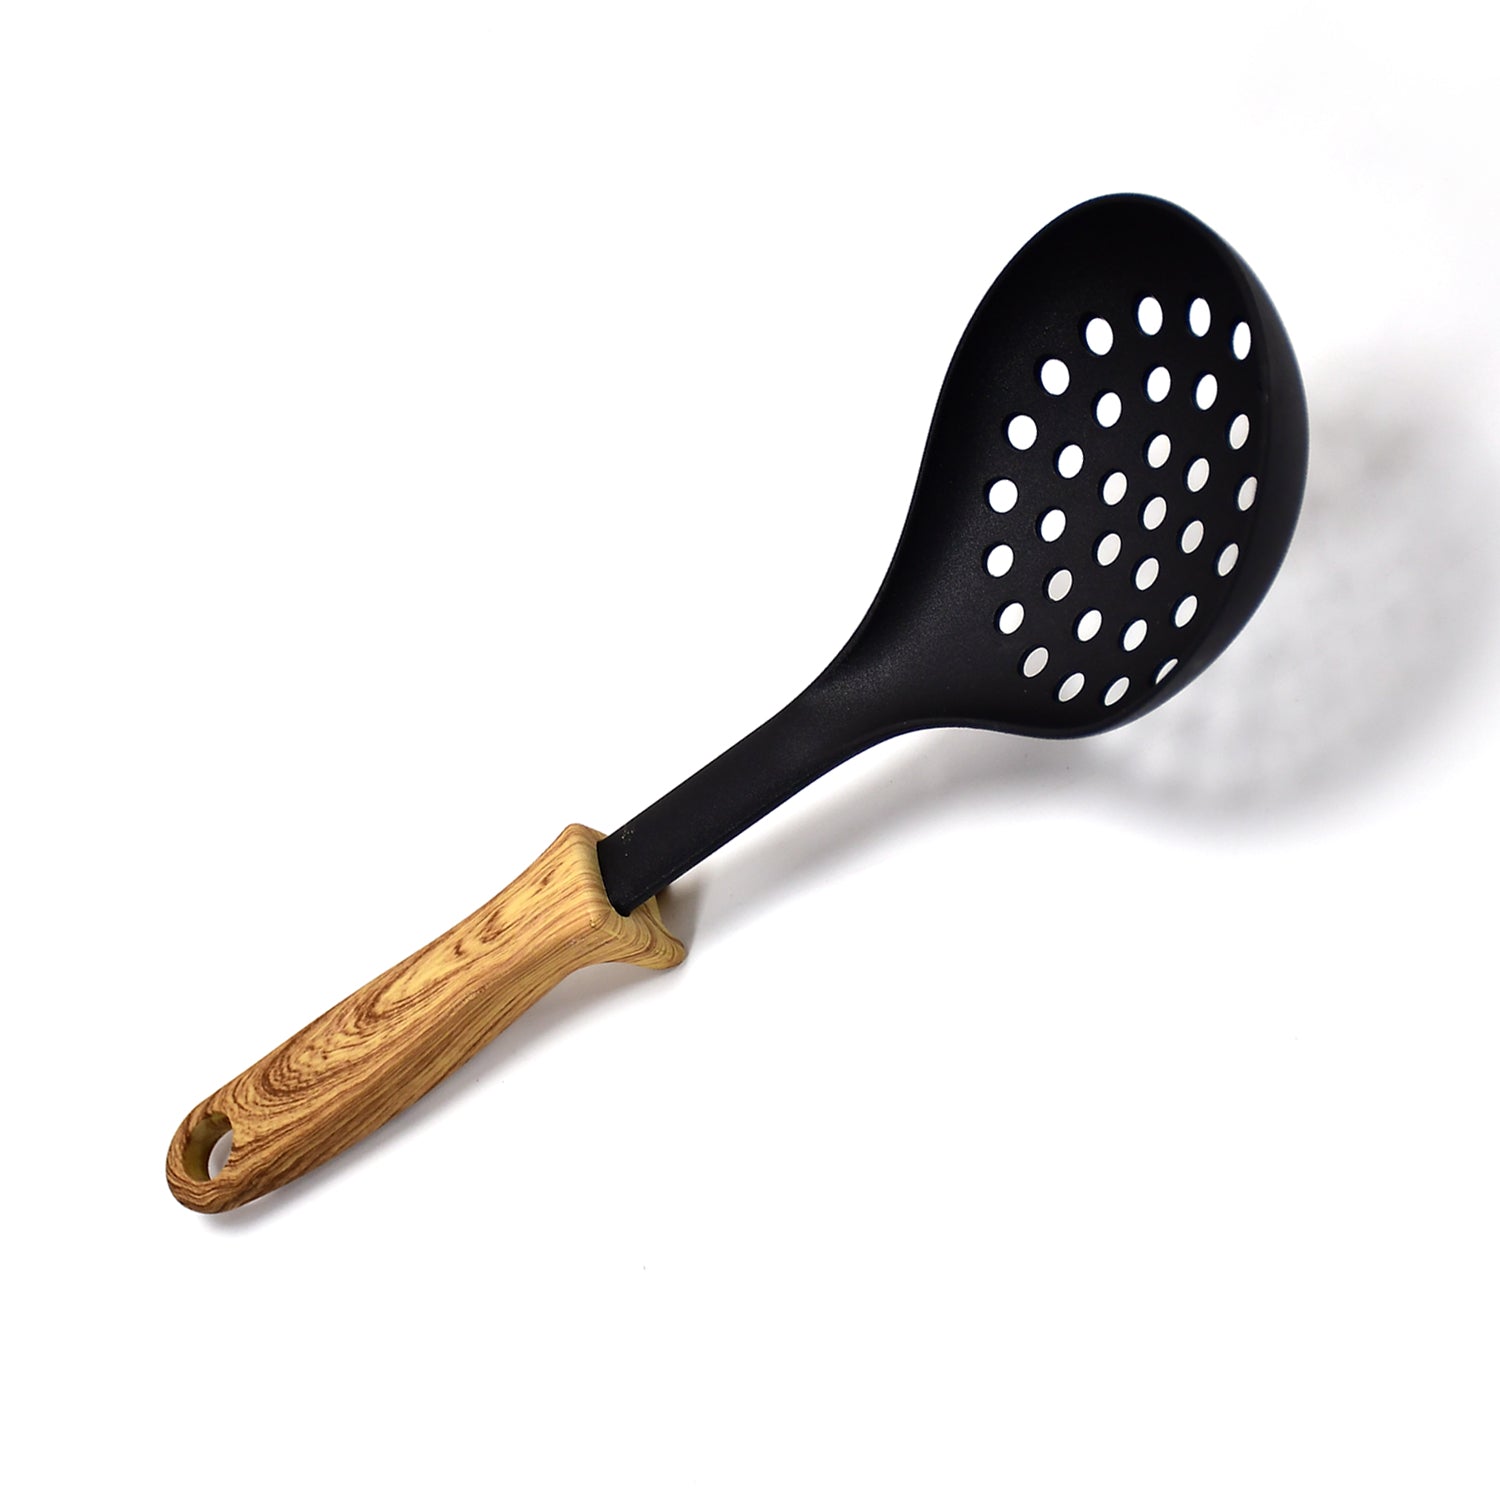 2589 Wooden Handle Design Silicone Kitchenware Non-stick Cookware Cooking Shovel Spoon Slotted Shovel Kitchen Utensils with Storage Bucket DeoDap